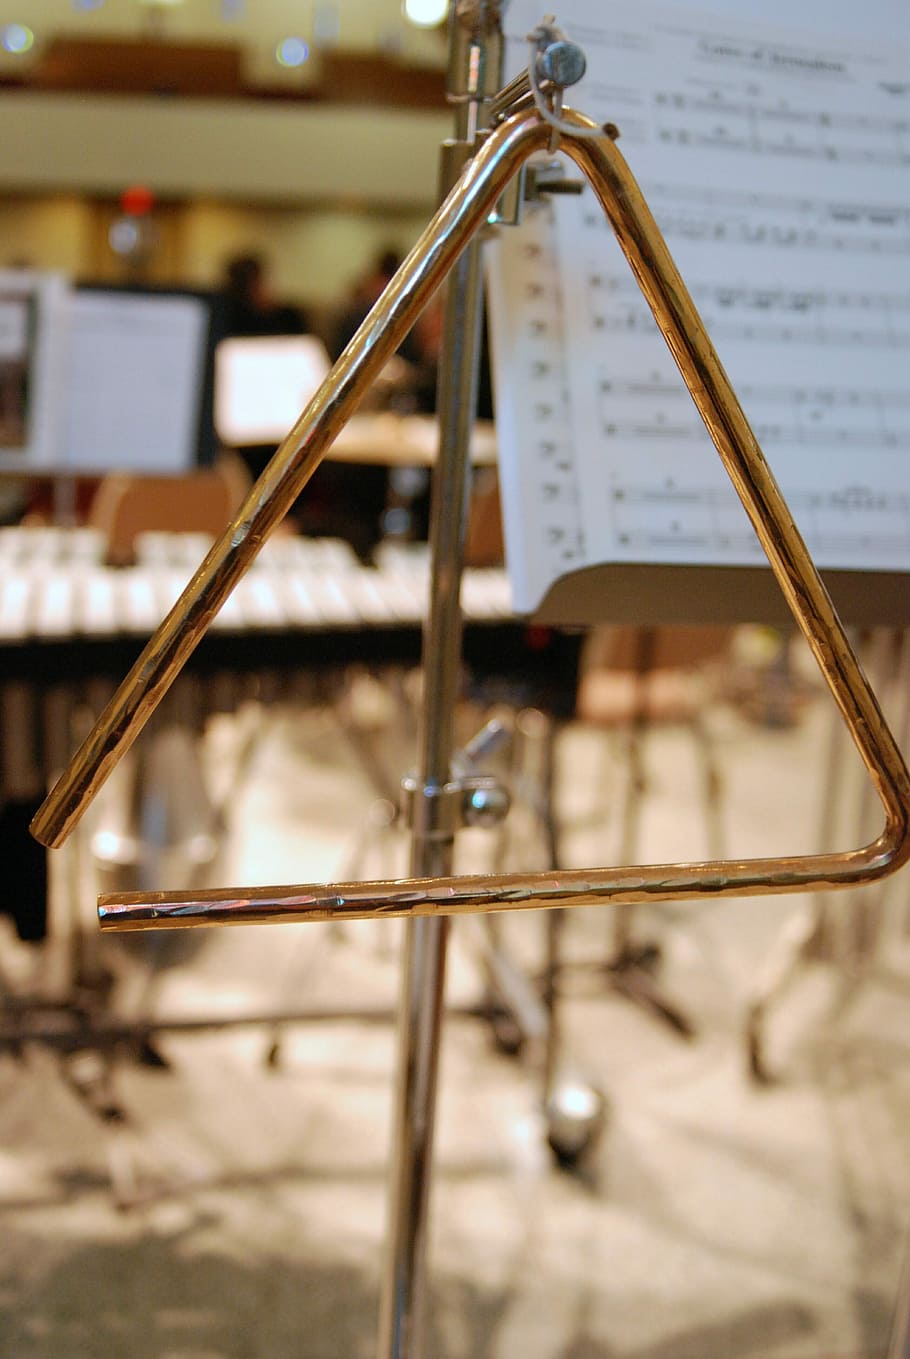 Percussion, Triangle, Instrument, music, classical music, arts culture and entertainment, musical instrument, performing arts event, performance, sheet music